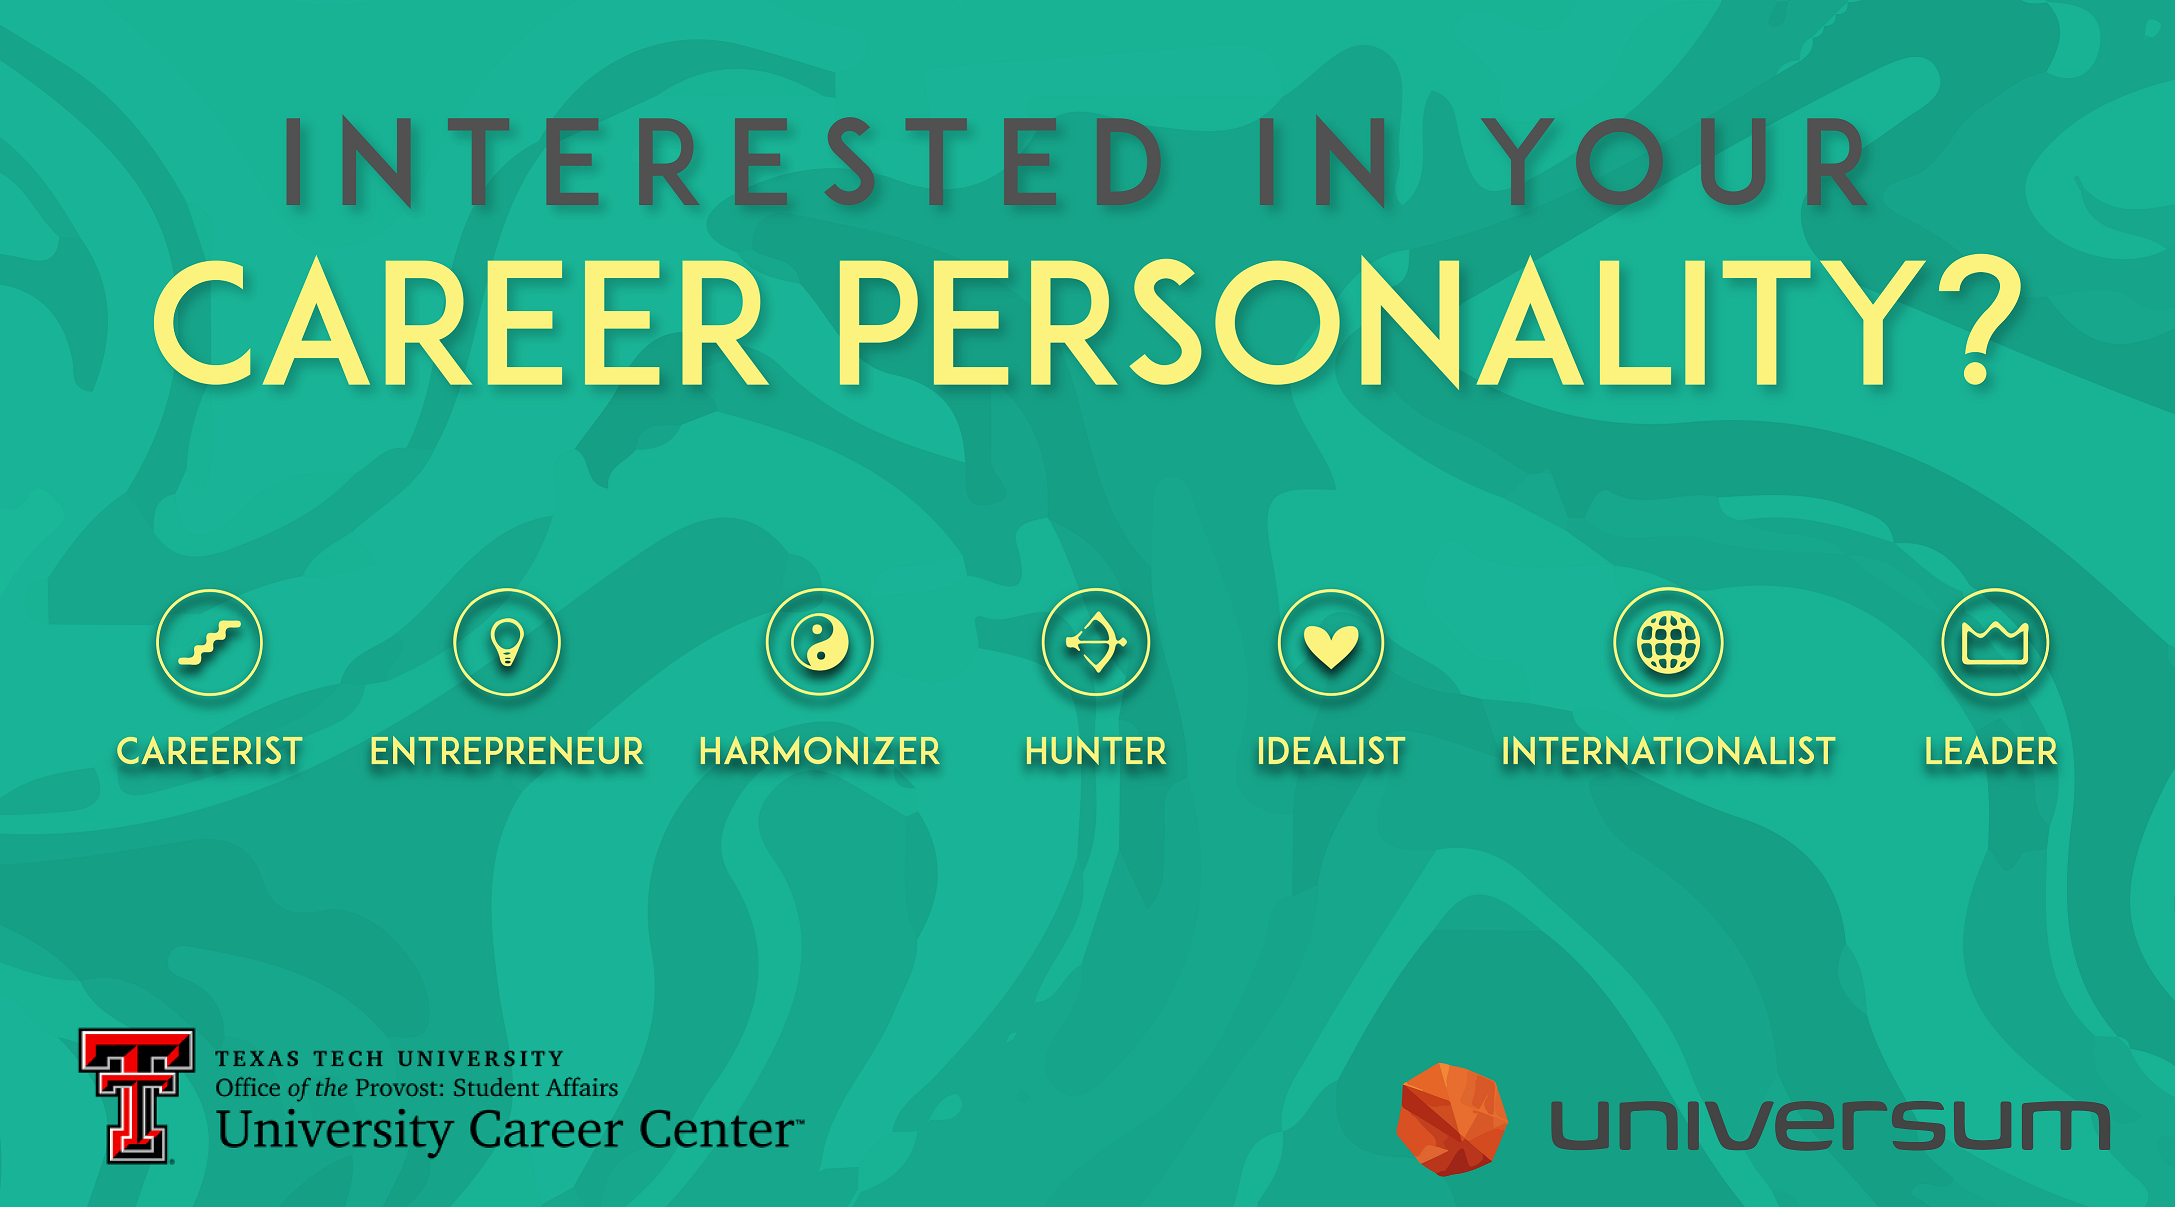 Interested in your career personality? Careerist, entrepreneur, harmonizer, hunter, idealist, internationalist, and leader.  There are 7 different career personality types.  Find out yours today! 